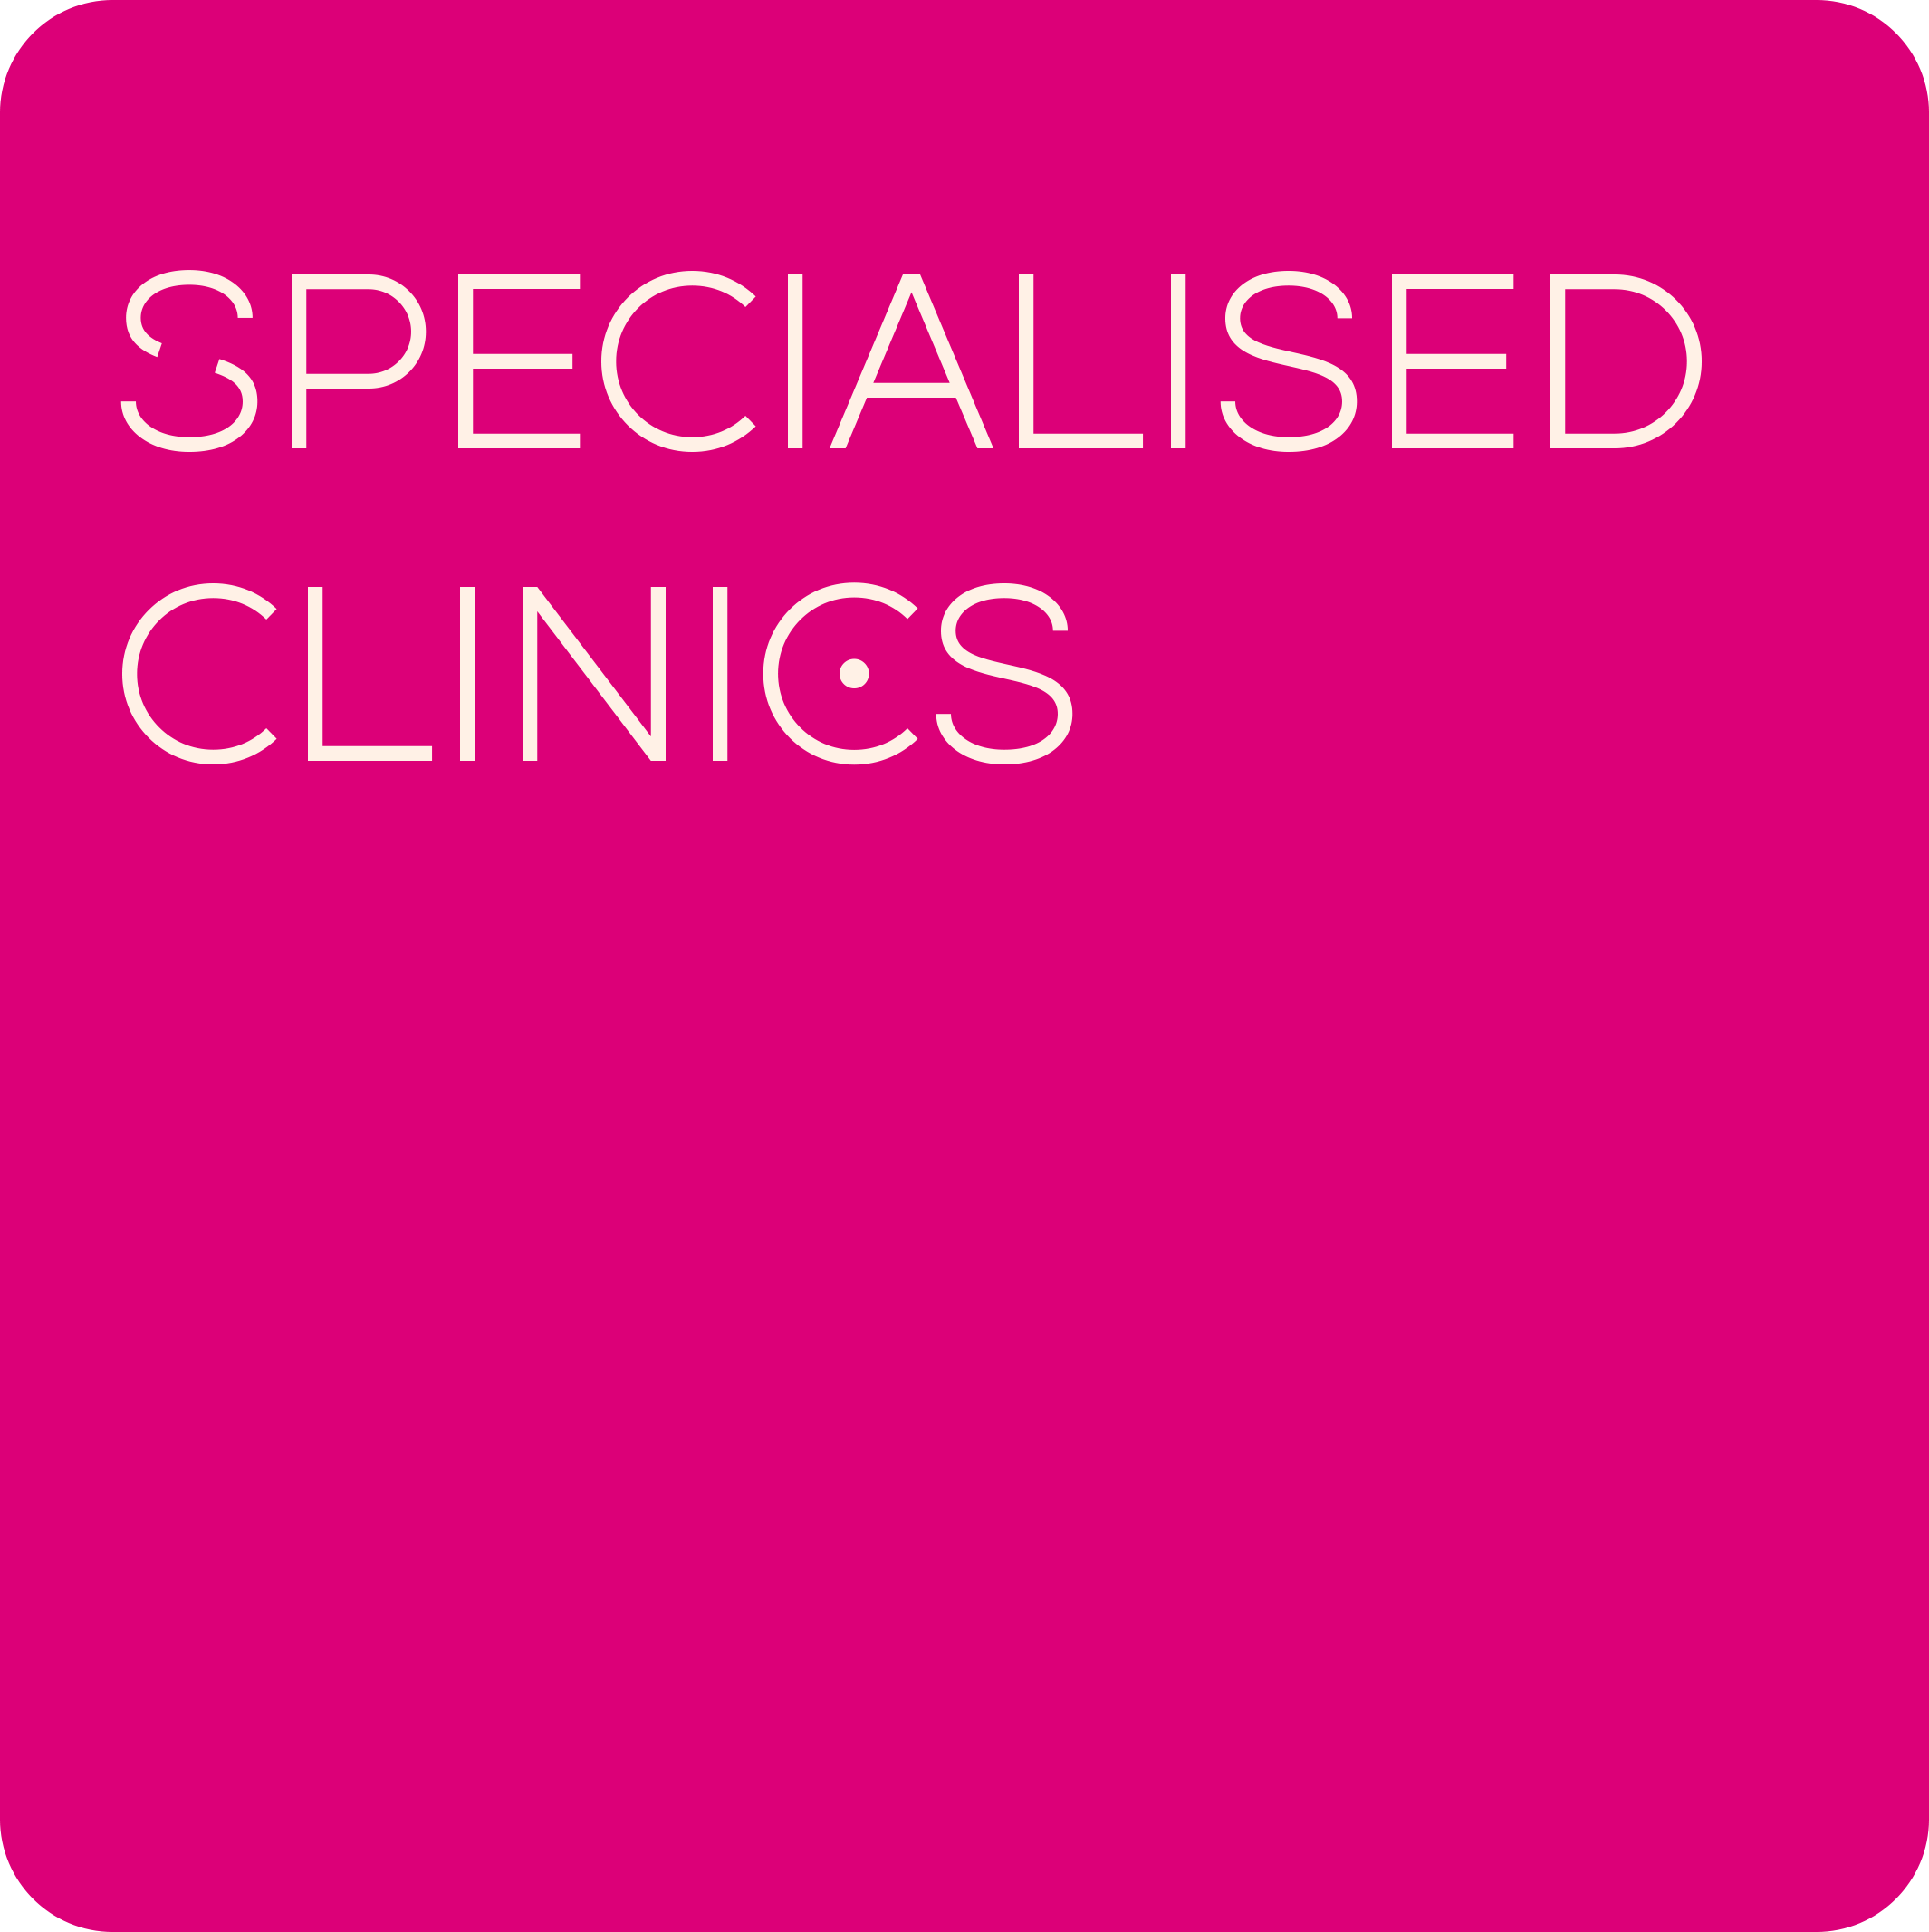 Specialised clinics